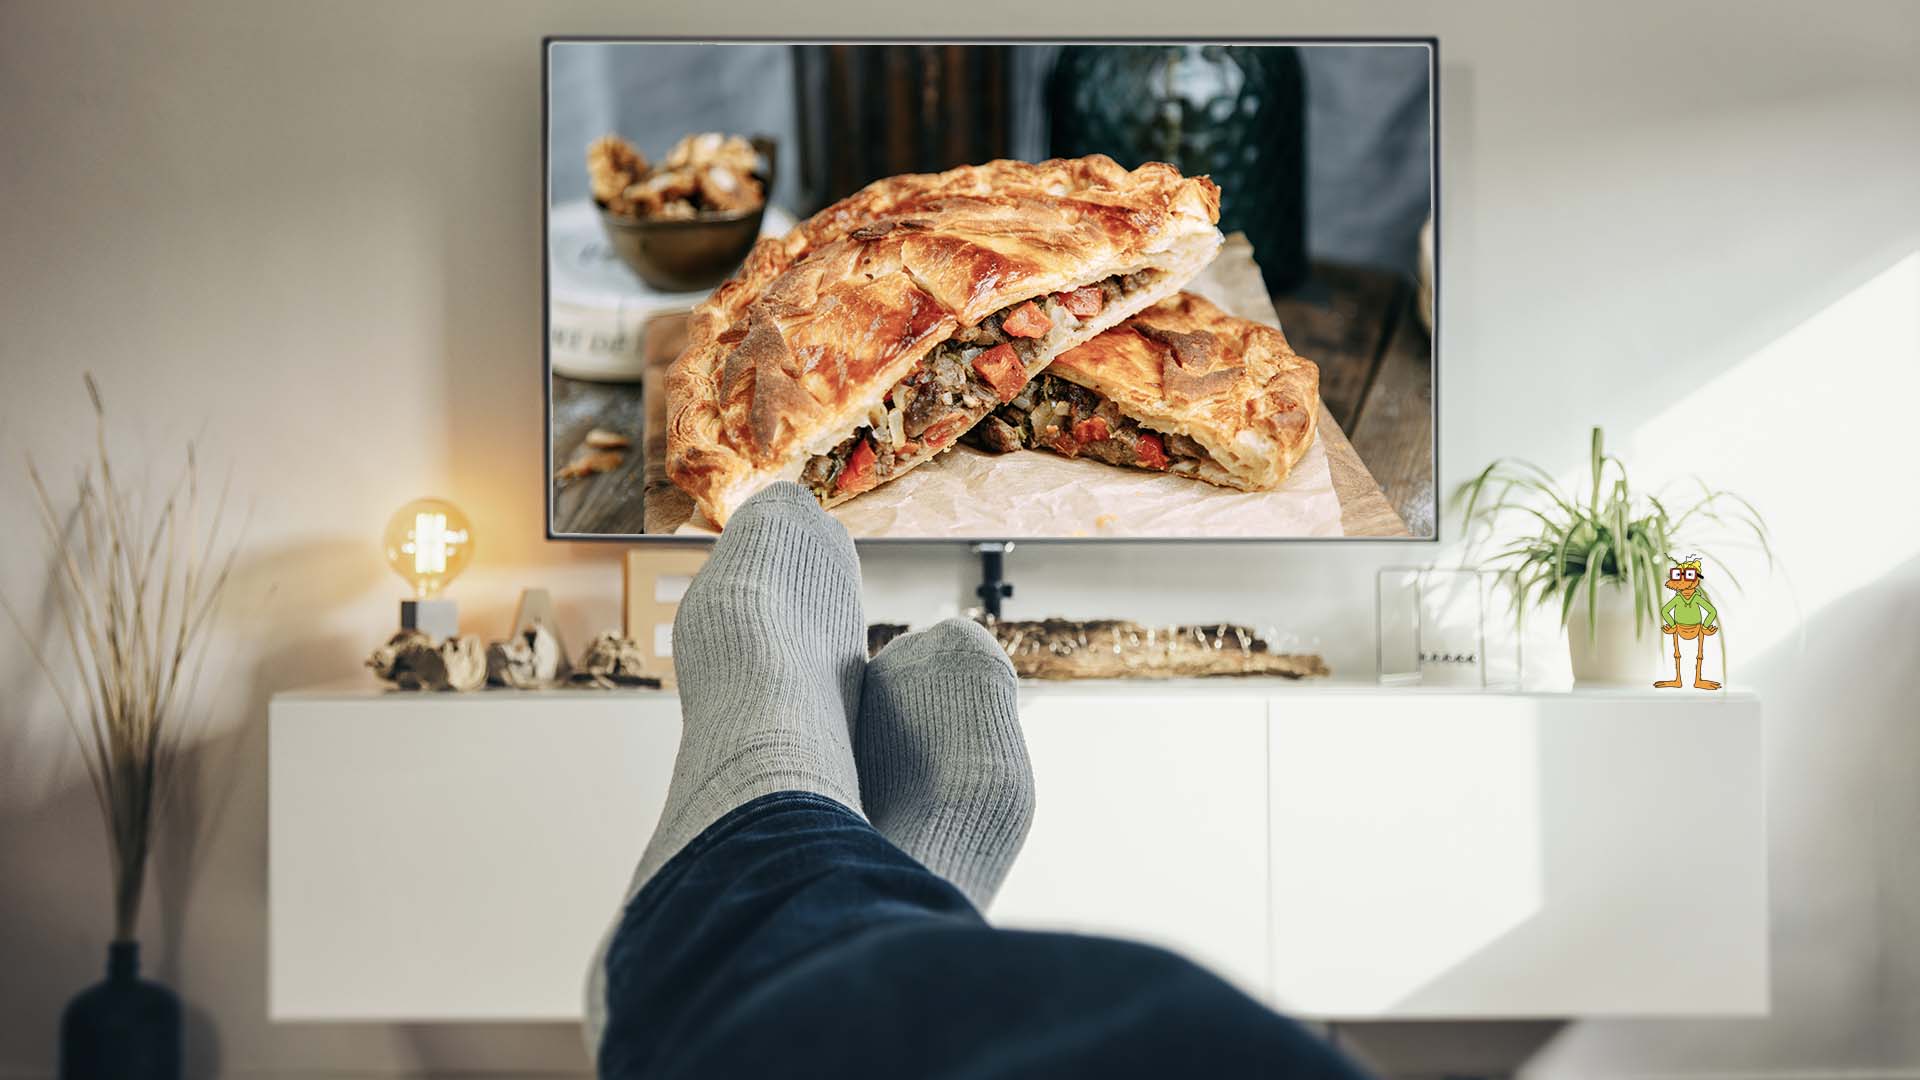 A TV show about pies